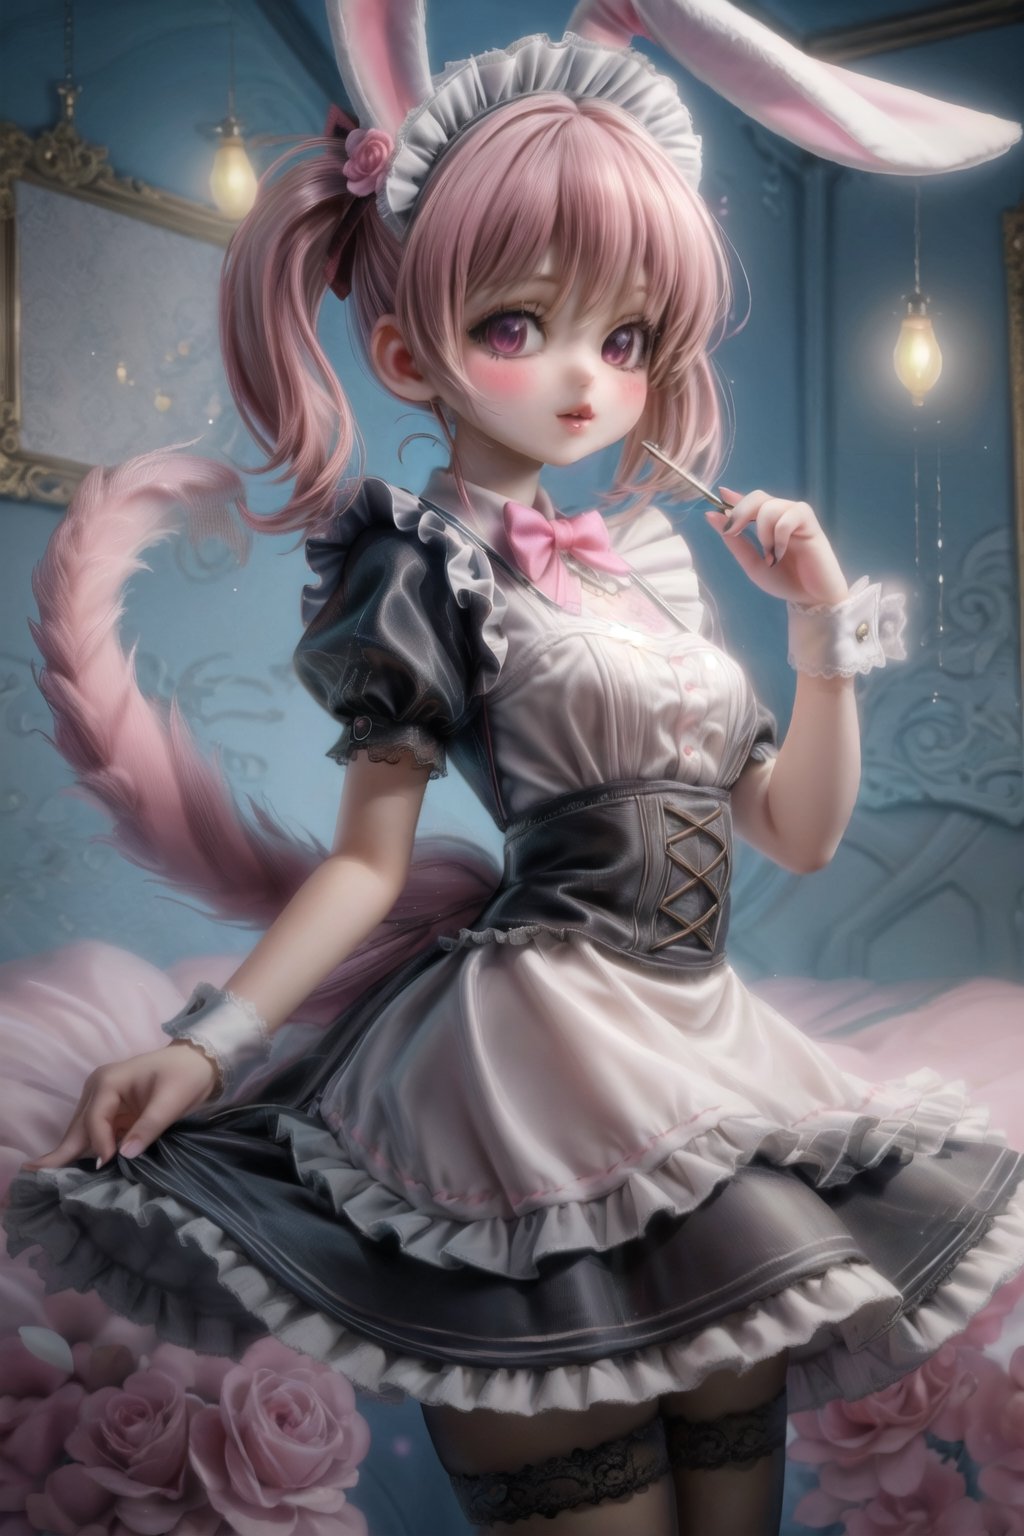 The pink bunny system, a system in which women dress as cute pink bunnies. In this visually stunning image, a delicate pink bunny is depicted with intricate lace details on her outfit, a fluffy tail, and over-the-top makeup. The image appears to be a detailed digital painting, soft pastel colors and whimsical details create a whimsical and charming atmosphere. This high quality image exudes charm and fantasy, playful innocence and femininity. Maid uniform, mikazuki_kiryu
